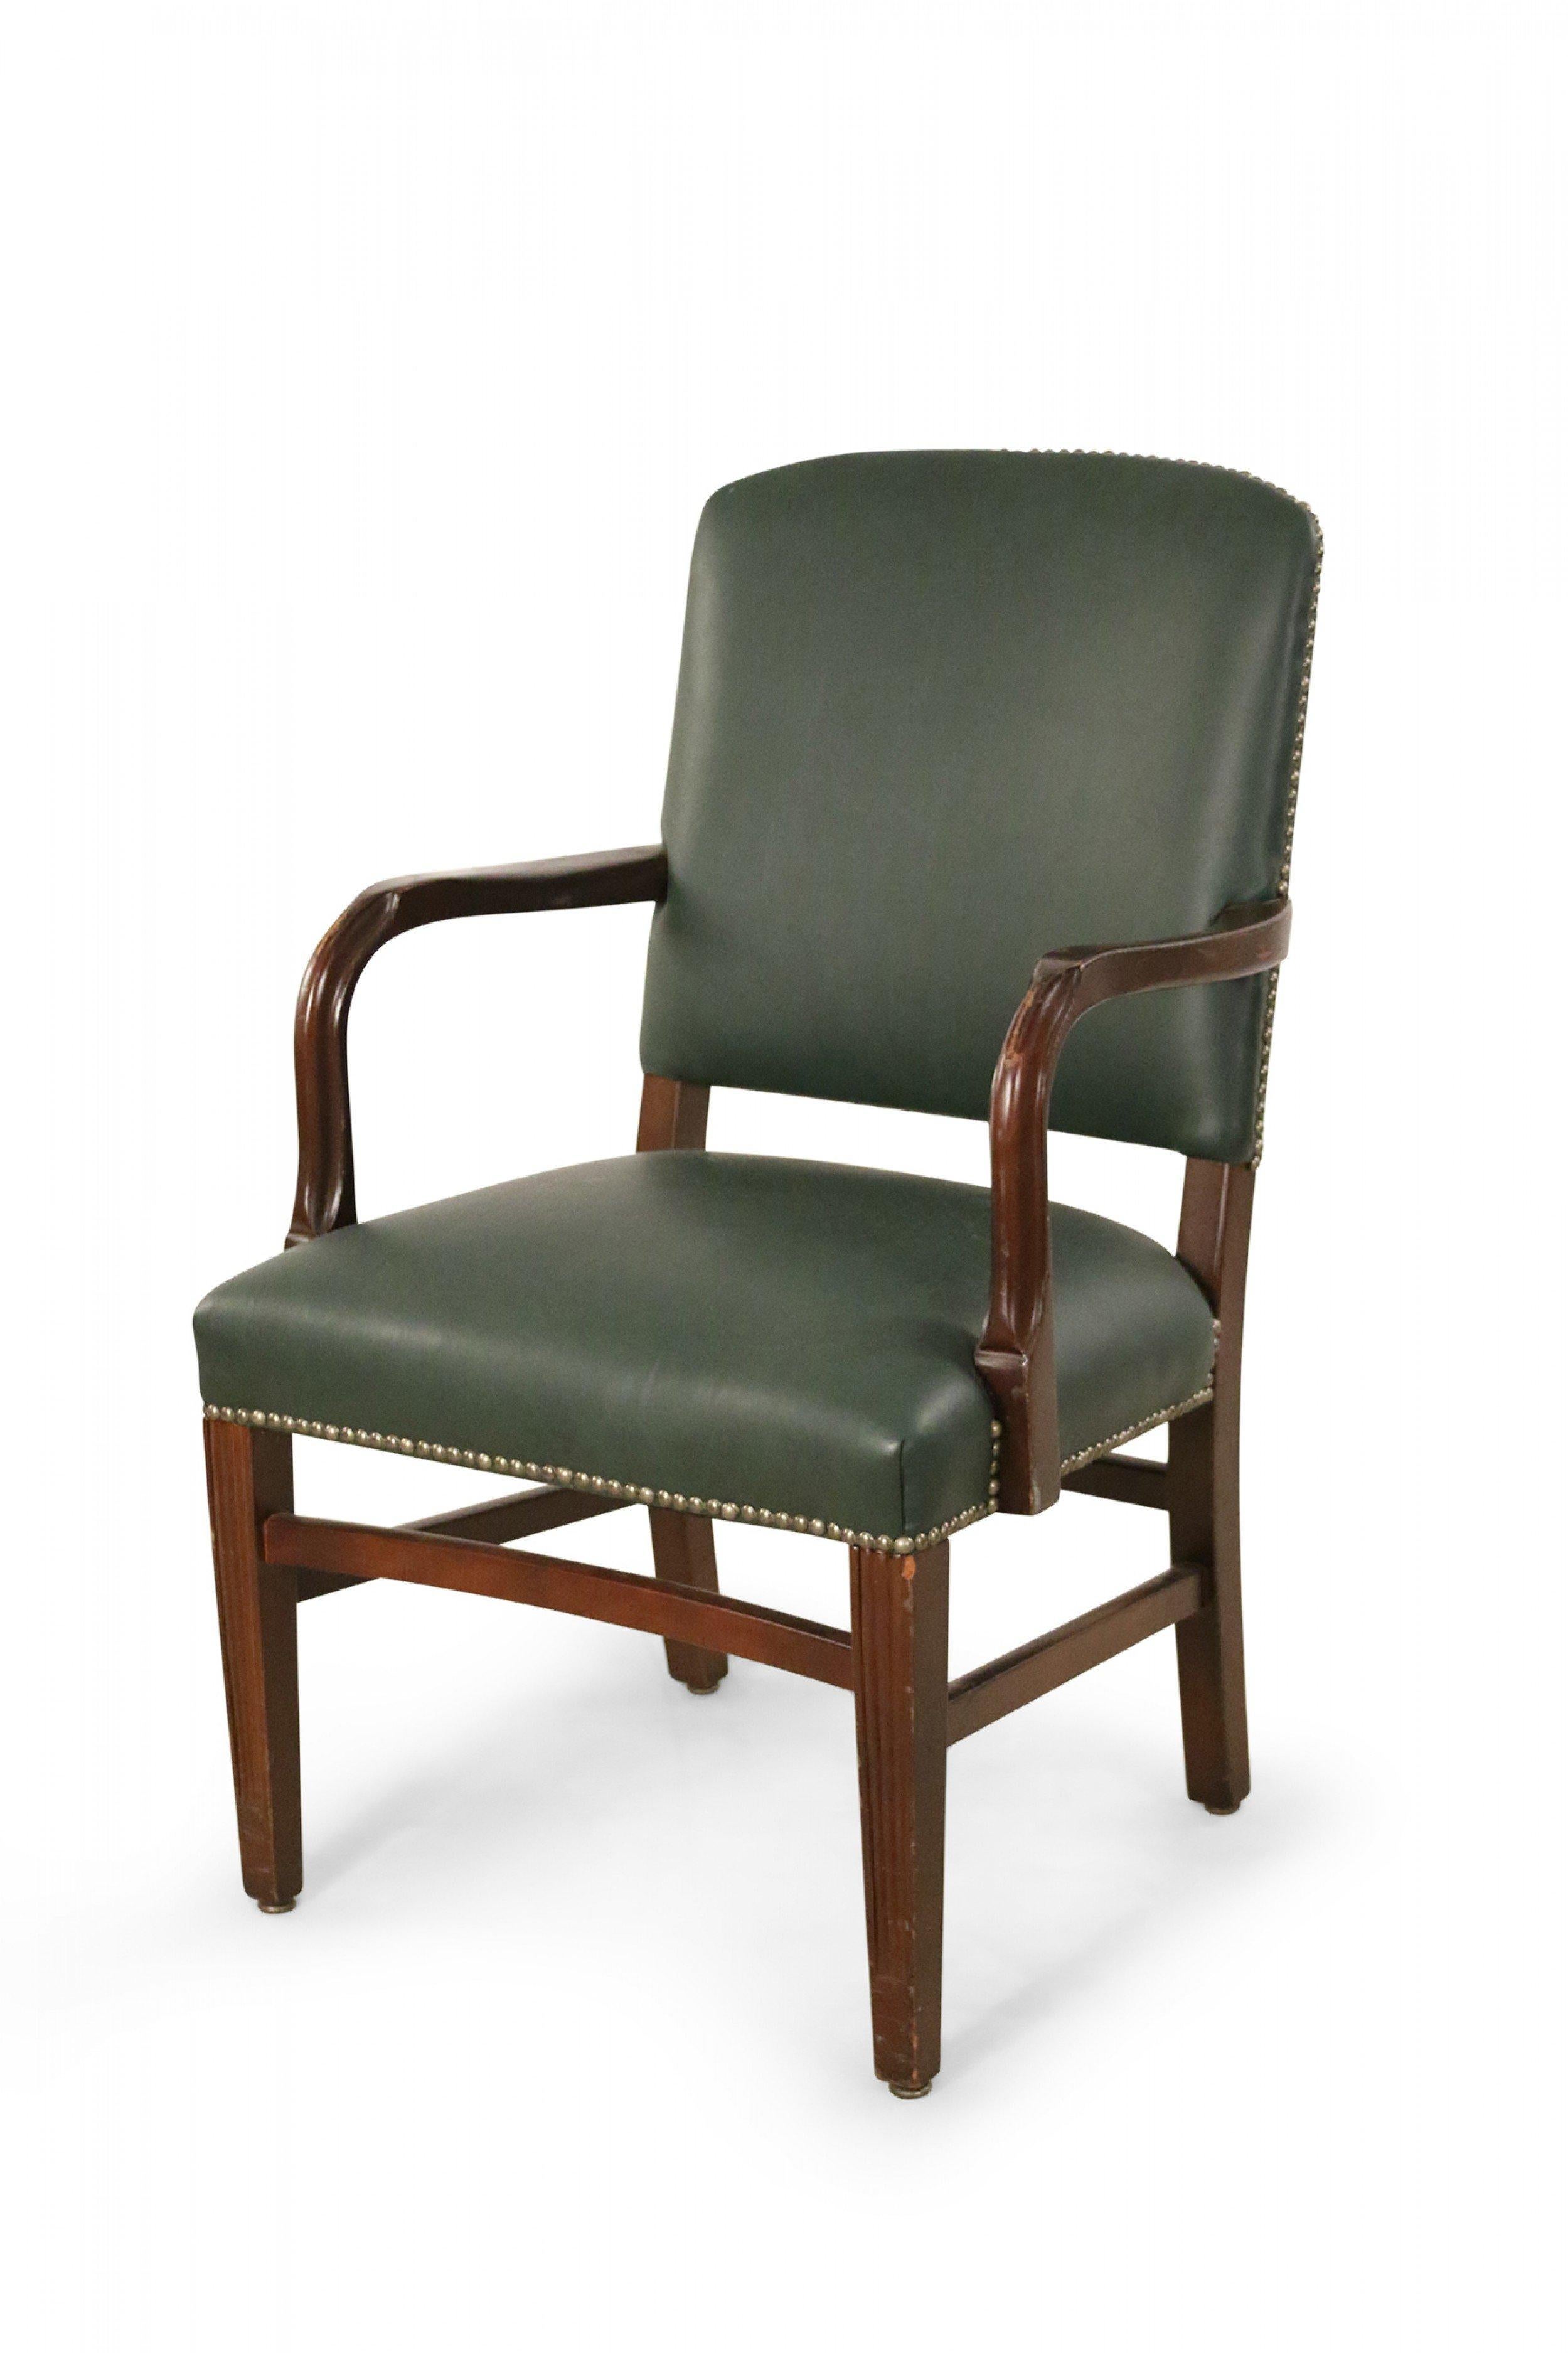 Set of 4 English Victorian-style (20th century) dark green leather armchairs with mahogany wood frames, curved arms, and brass upholstery nail trim. (priced as set).
         